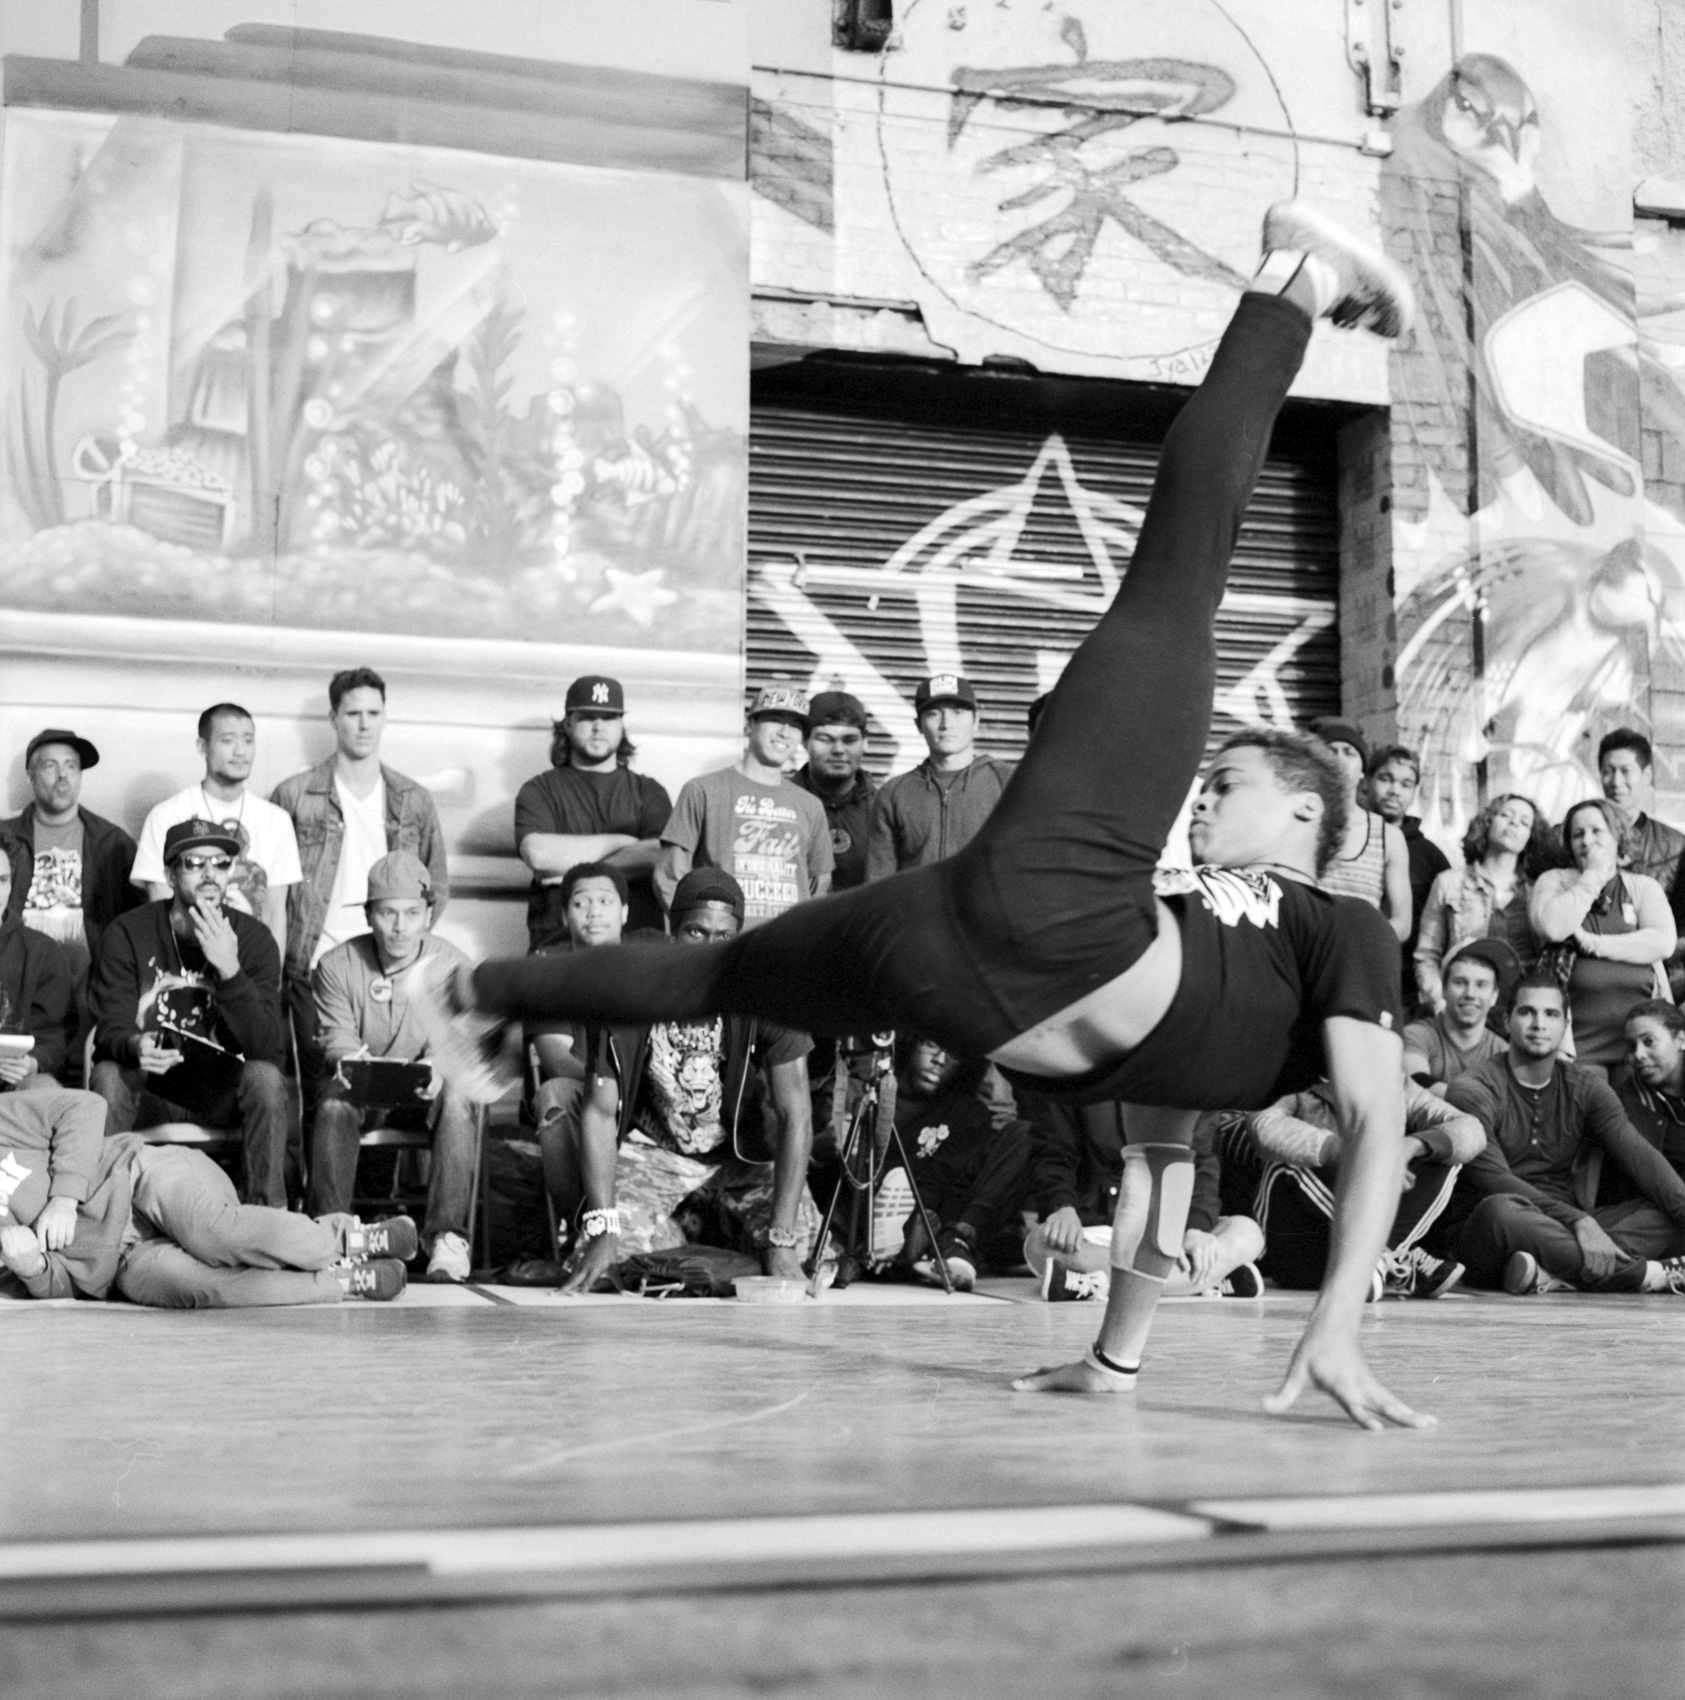 A-BREAKDANCER-PERFORMS-FOR-A-CROWD-AT-5-POINTZ-QUEENS-